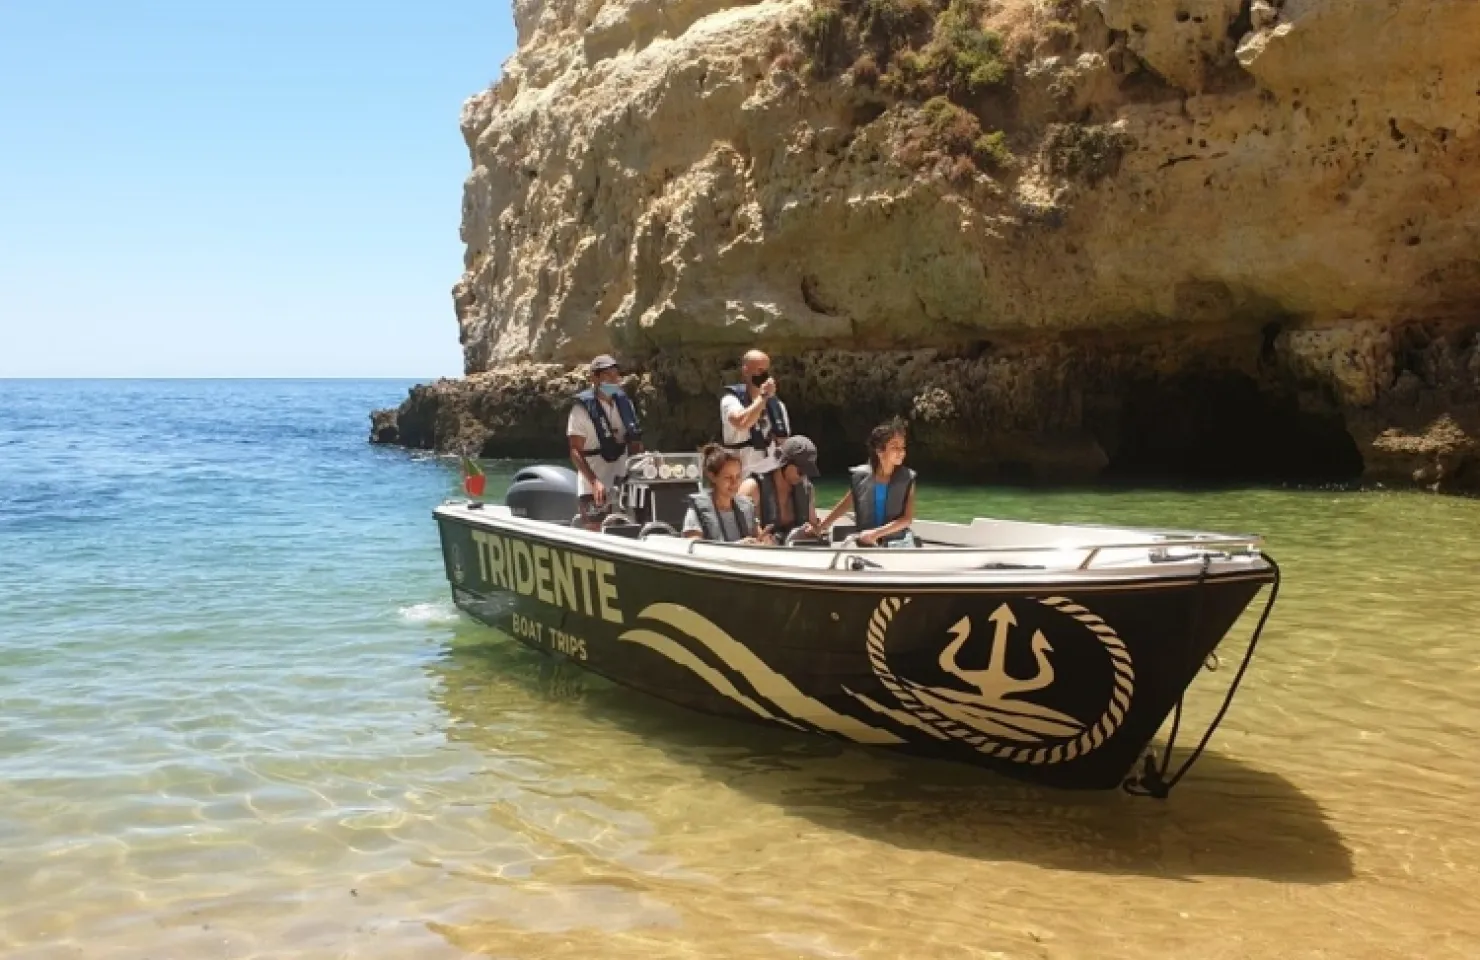 Benagil Cave Cruise by Tridente Boat Trips - Algarve Boat Trips and tours